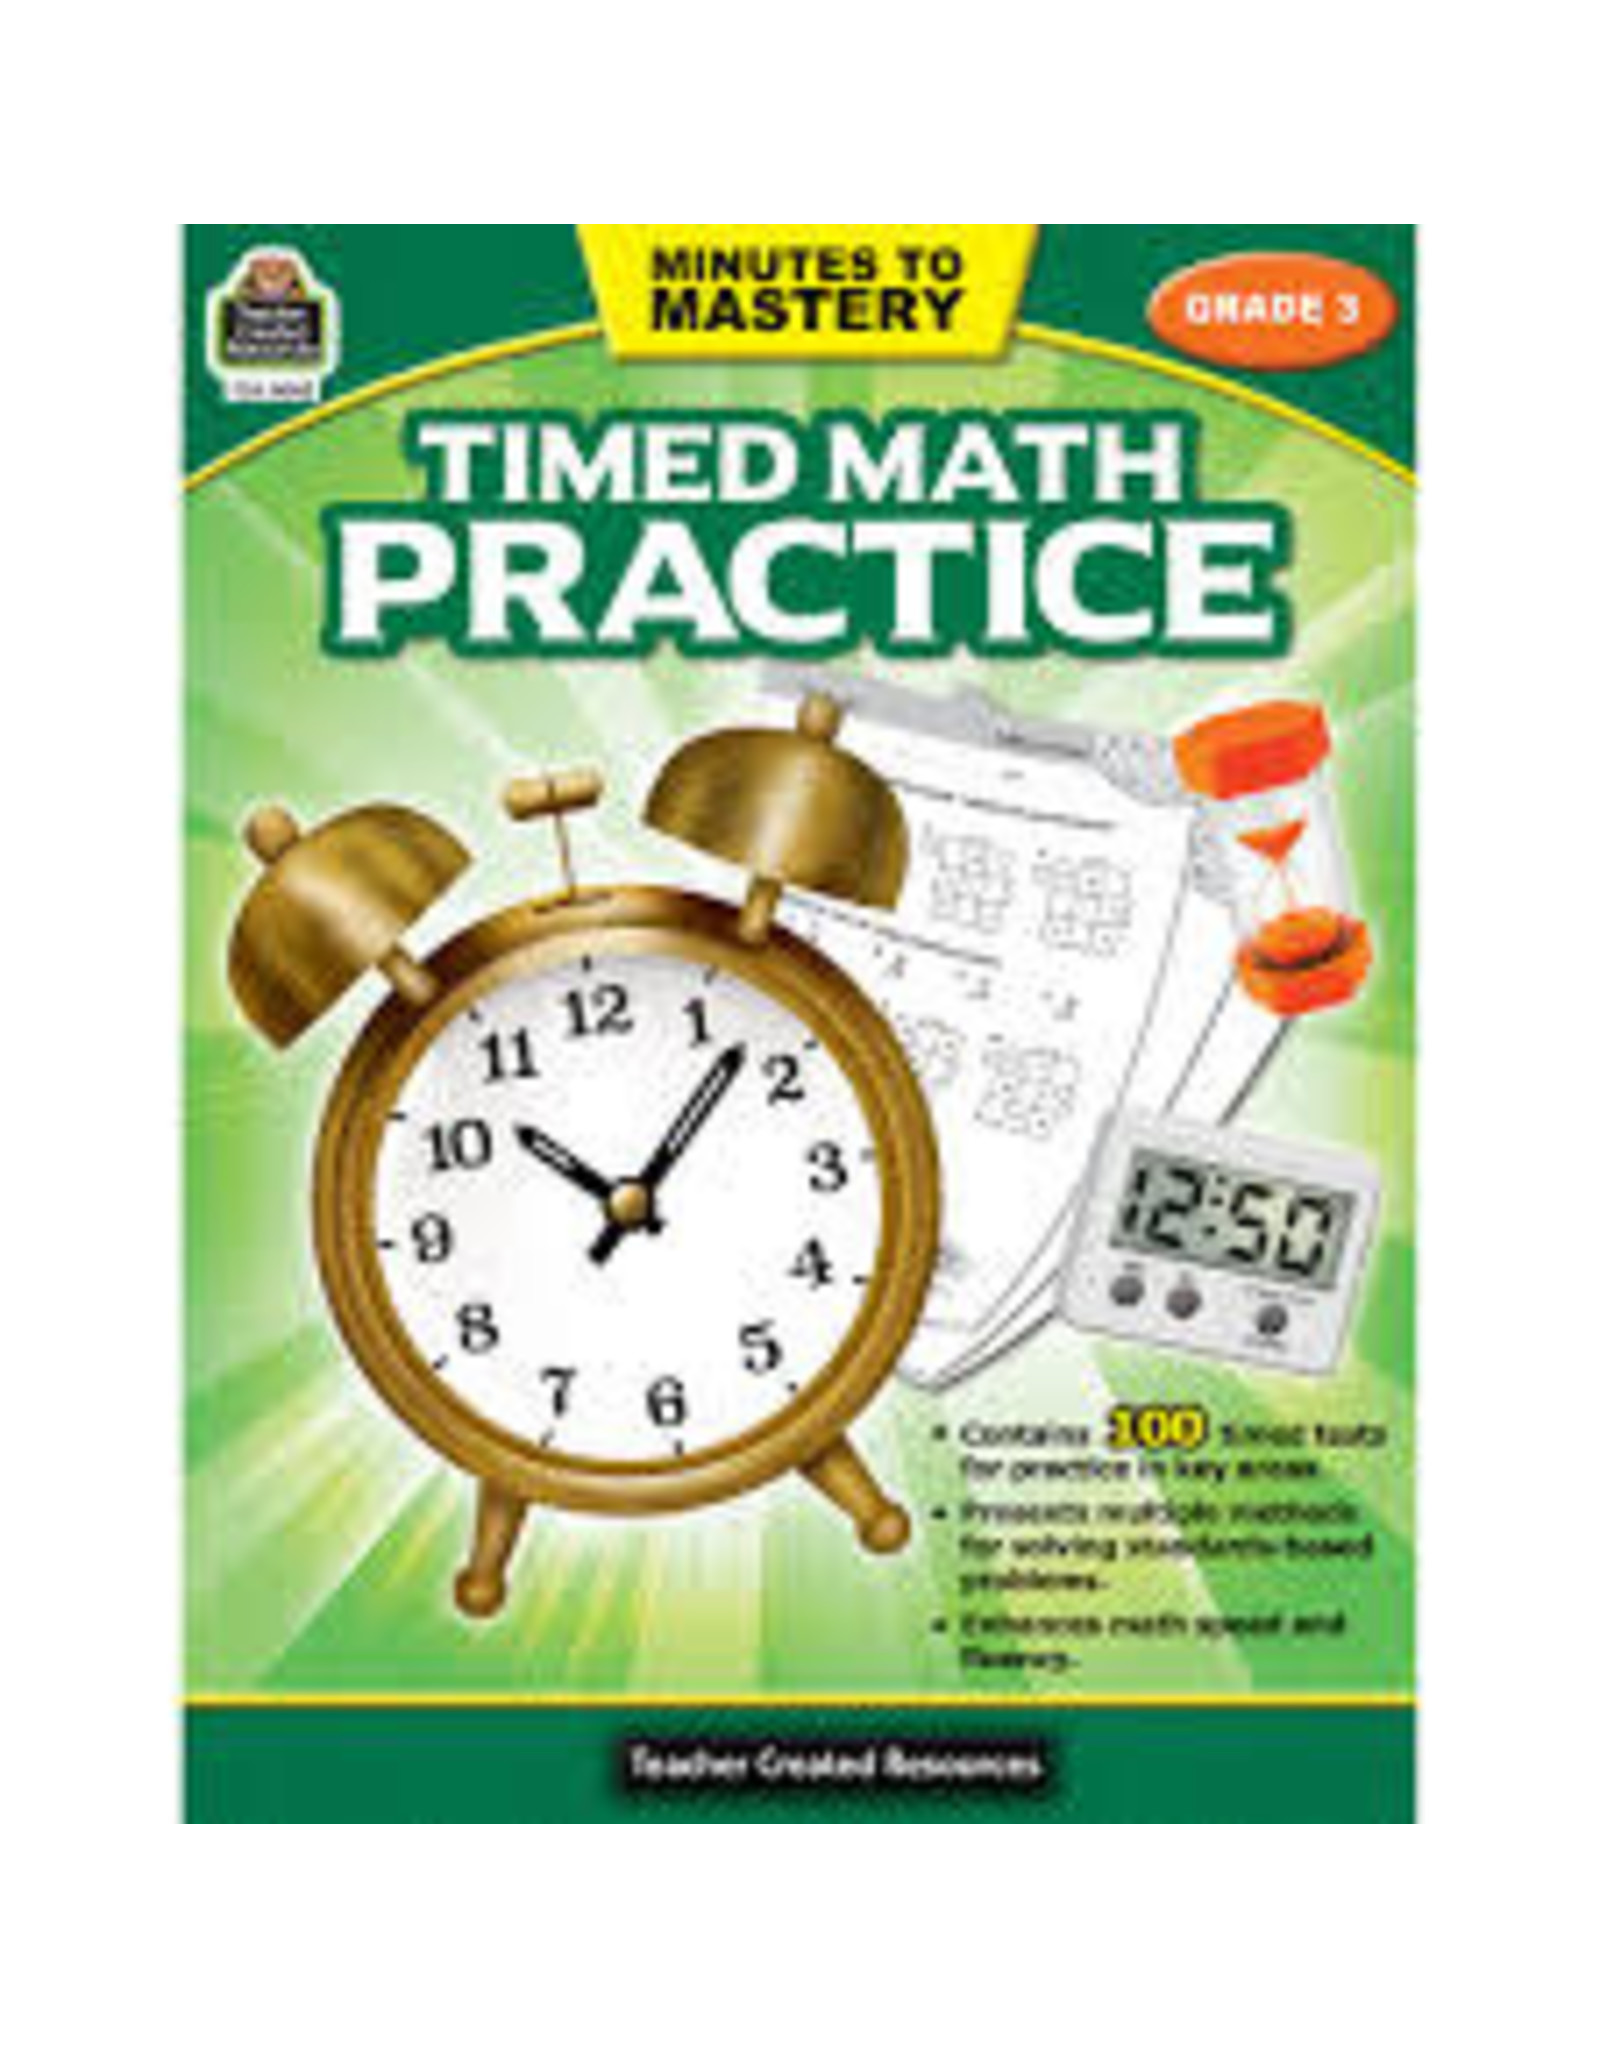 Timed Math Practice